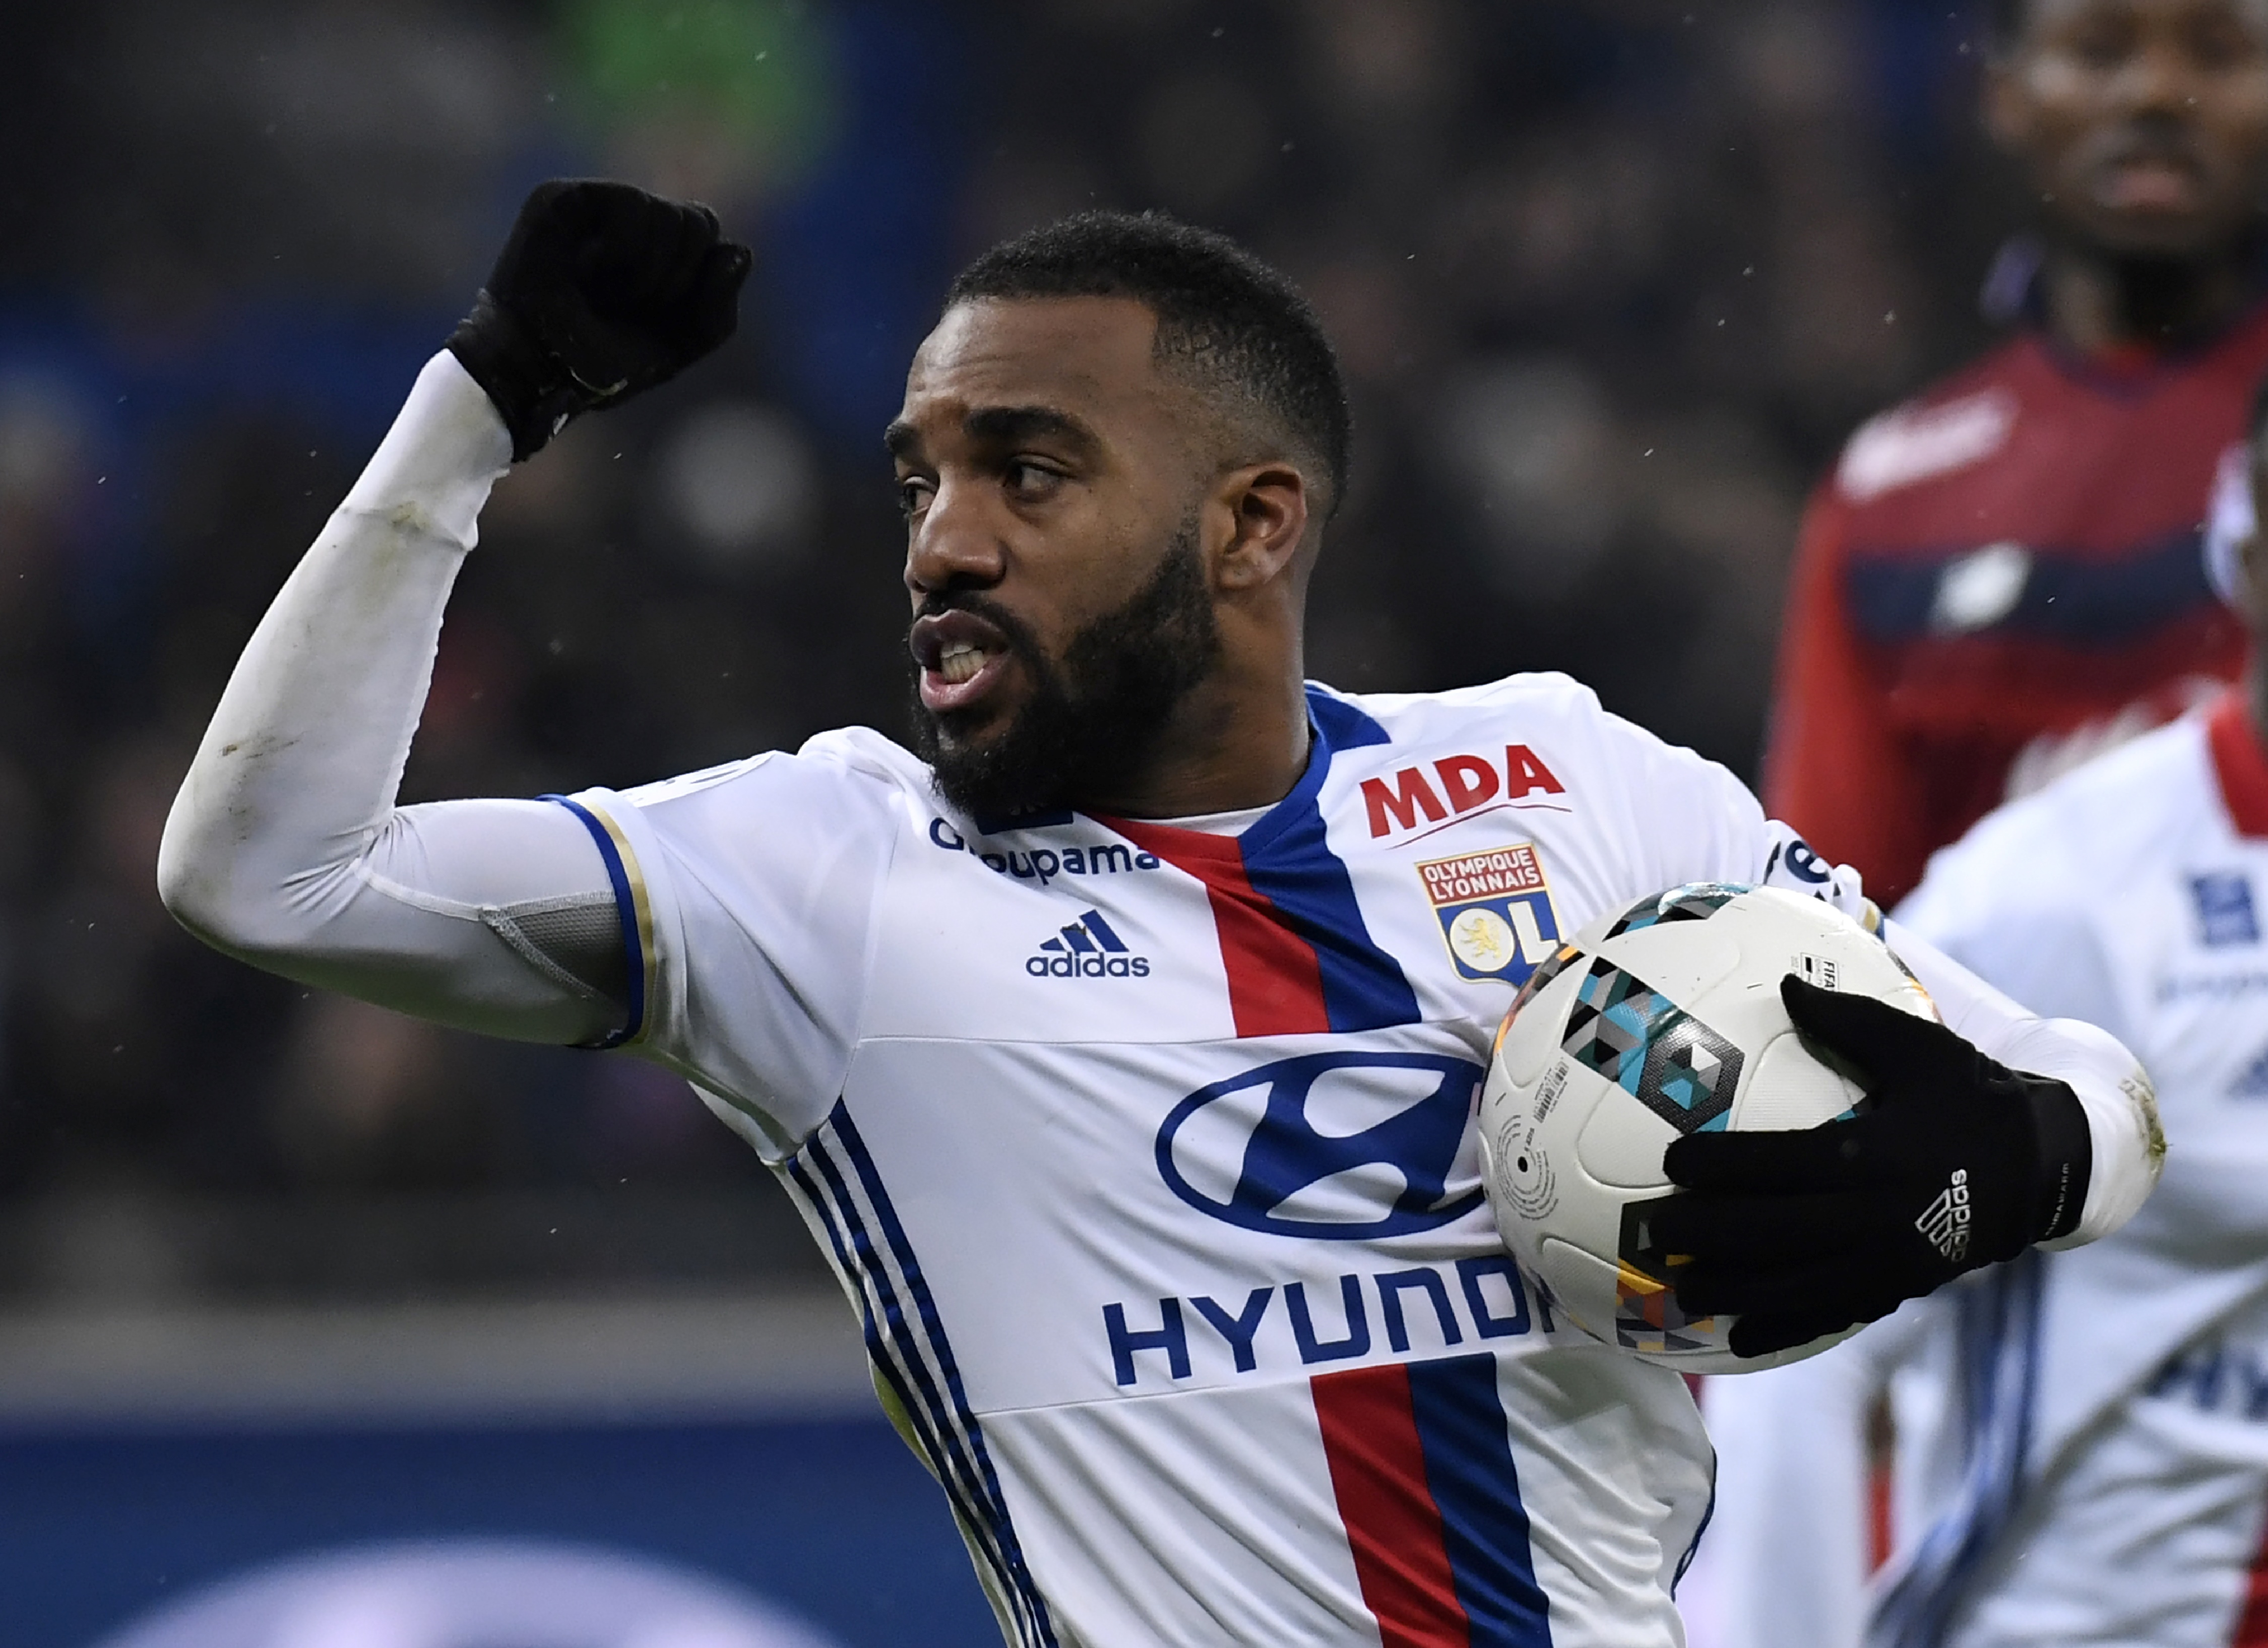 Lyon's French forward Alexandre Lacazette celebrates after scoring a penalty  during the French L1 football match Olympique Lyonnais (OL) against Lille (LOSC) on January 28, 2017, at the Parc Olympique Lyonnais stadium in Decines-Charpieu near Lyon, central-eastern France.    / AFP / PHILIPPE DESMAZES        (Photo credit should read PHILIPPE DESMAZES/AFP/Getty Images)